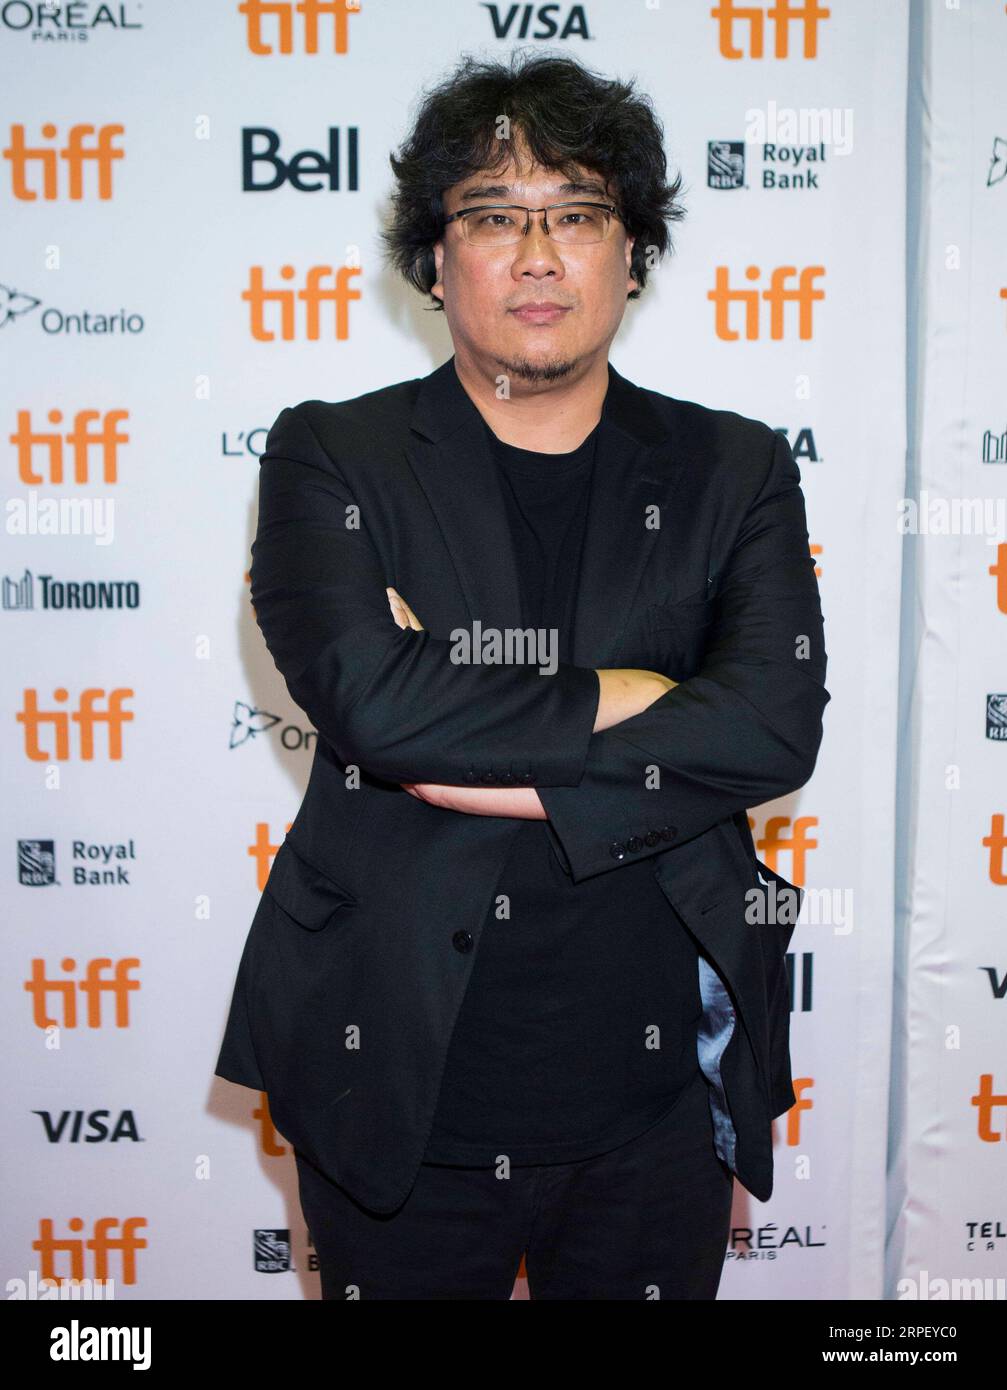 190907 -- TORONTO, Sept. 7, 2019 -- Director Bong Joon-ho poses for photos before the Canadian premiere of the film Parasite at Ryerson Theatre during the 2019 Toronto International Film Festival TIFF in Toronto, Canada, Sept. 6, 2019. Photo by /Xinhua CANADA-TORONTO-TIFF-FILM PARASITE ZouxZheng PUBLICATIONxNOTxINxCHN Stock Photo